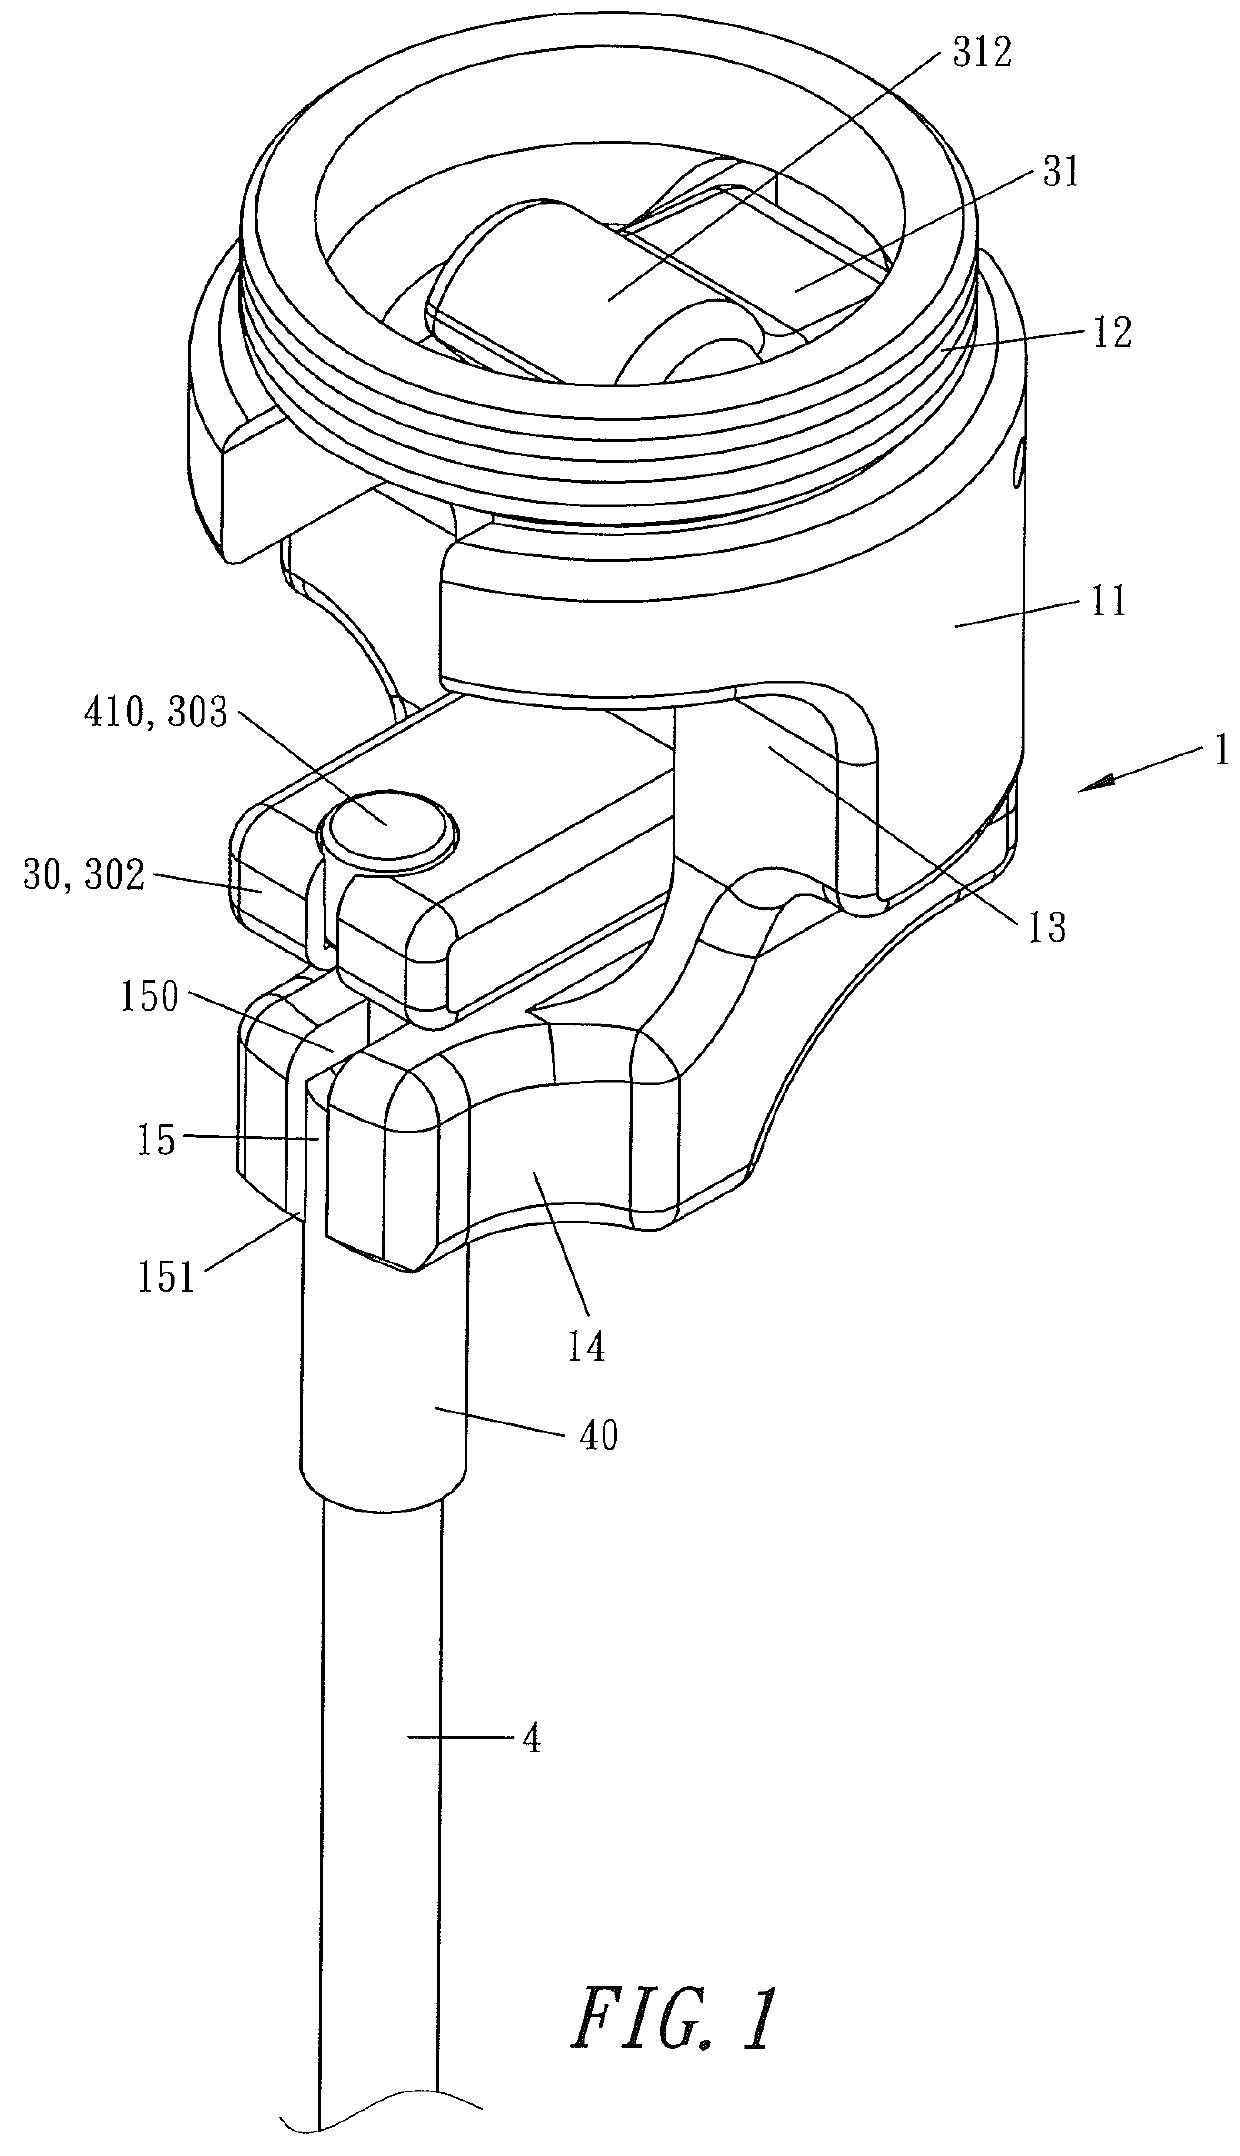 Control device of the height adjustment for a bicycle seat post